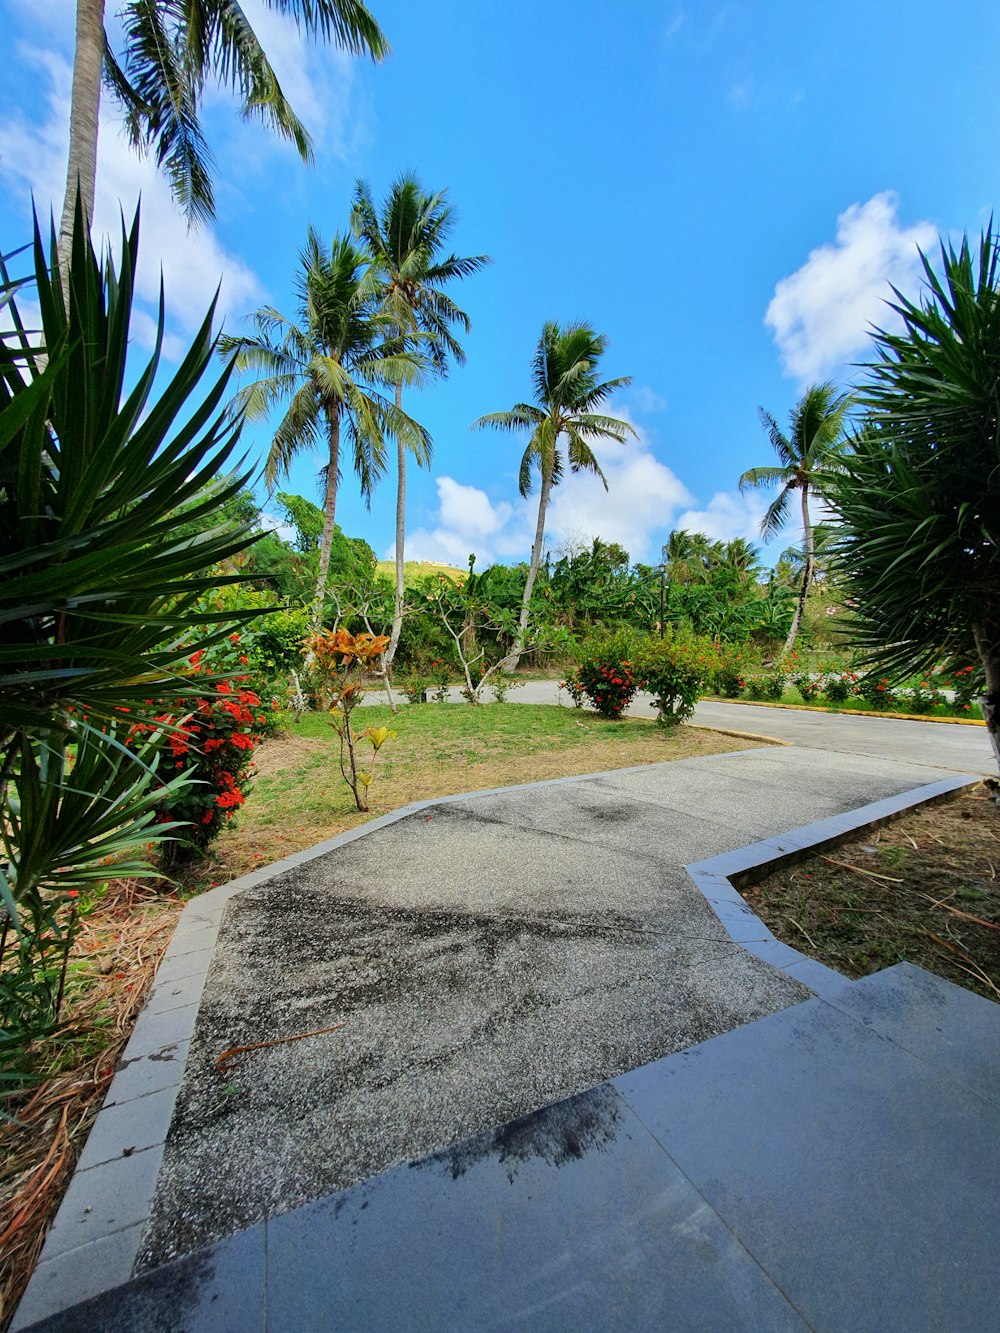 green palm trees near gray concrete pathway under blue sky during daytime